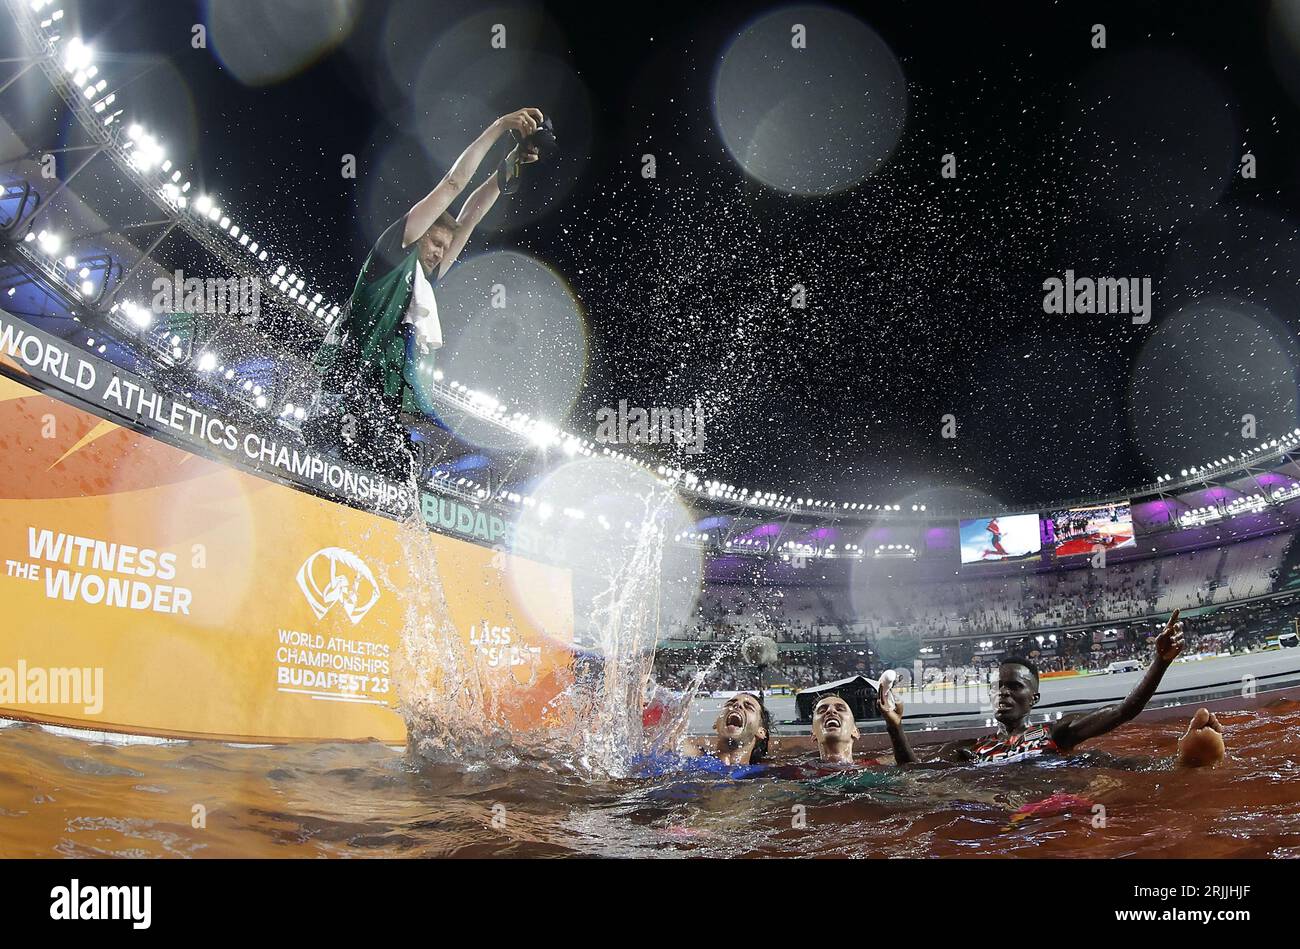 Budapest, Hungary. 22nd Aug, 2023. A photographer takes pictures for Men's high jump gold medalist Italy's Gianmarco Tamberi (2nd L), Men's 3000m Steeplechase gold medalist Soufiane El Bakkali (2nd R) of Morocco and bronze medalist Abraham Kibiwot of Kenya (1st R) at the World Athletics Championships Budapest 2023 in Budapest, Hungary, Aug. 22, 2023. Credit: Wang Lili/Xinhua/Alamy Live News Stock Photo